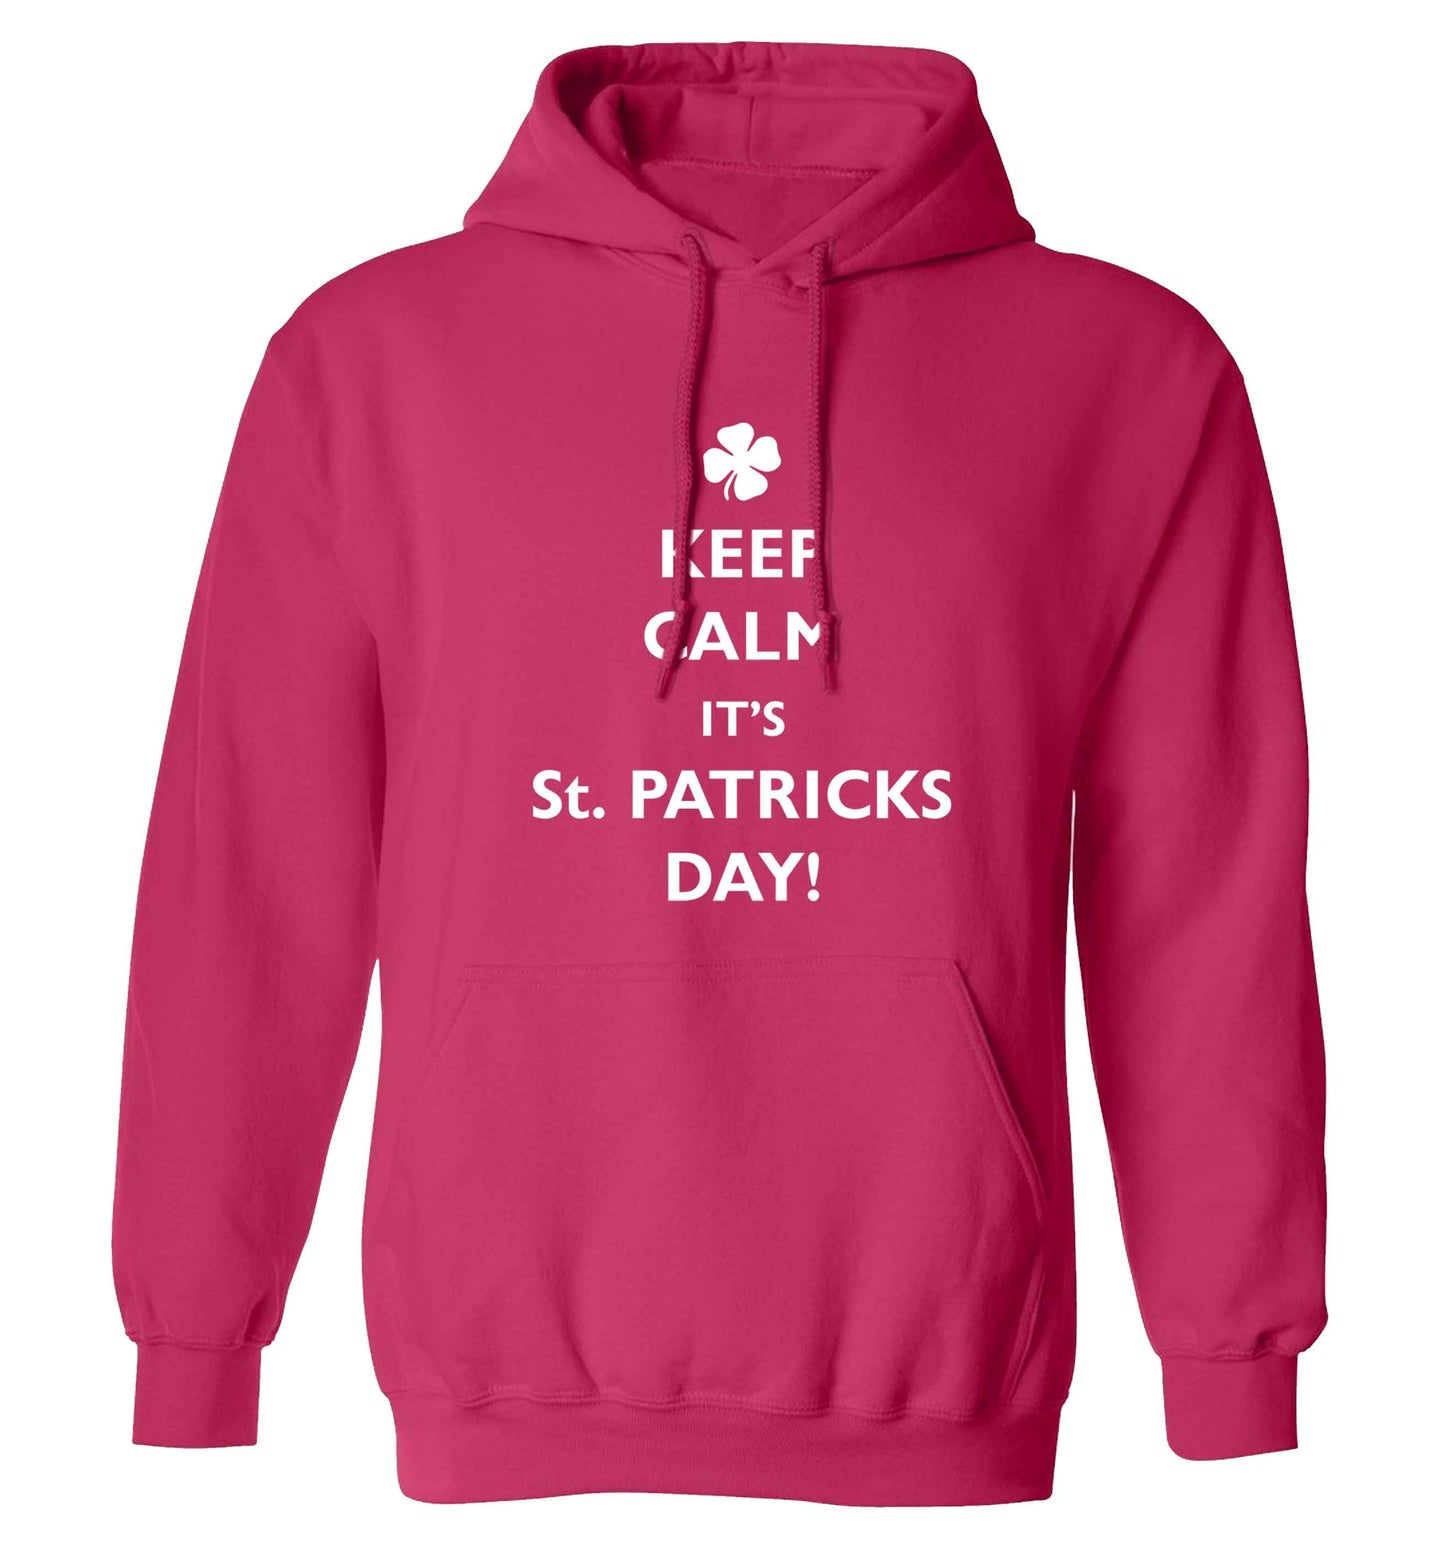 Keep calm it's St.Patricks day adults unisex pink hoodie 2XL